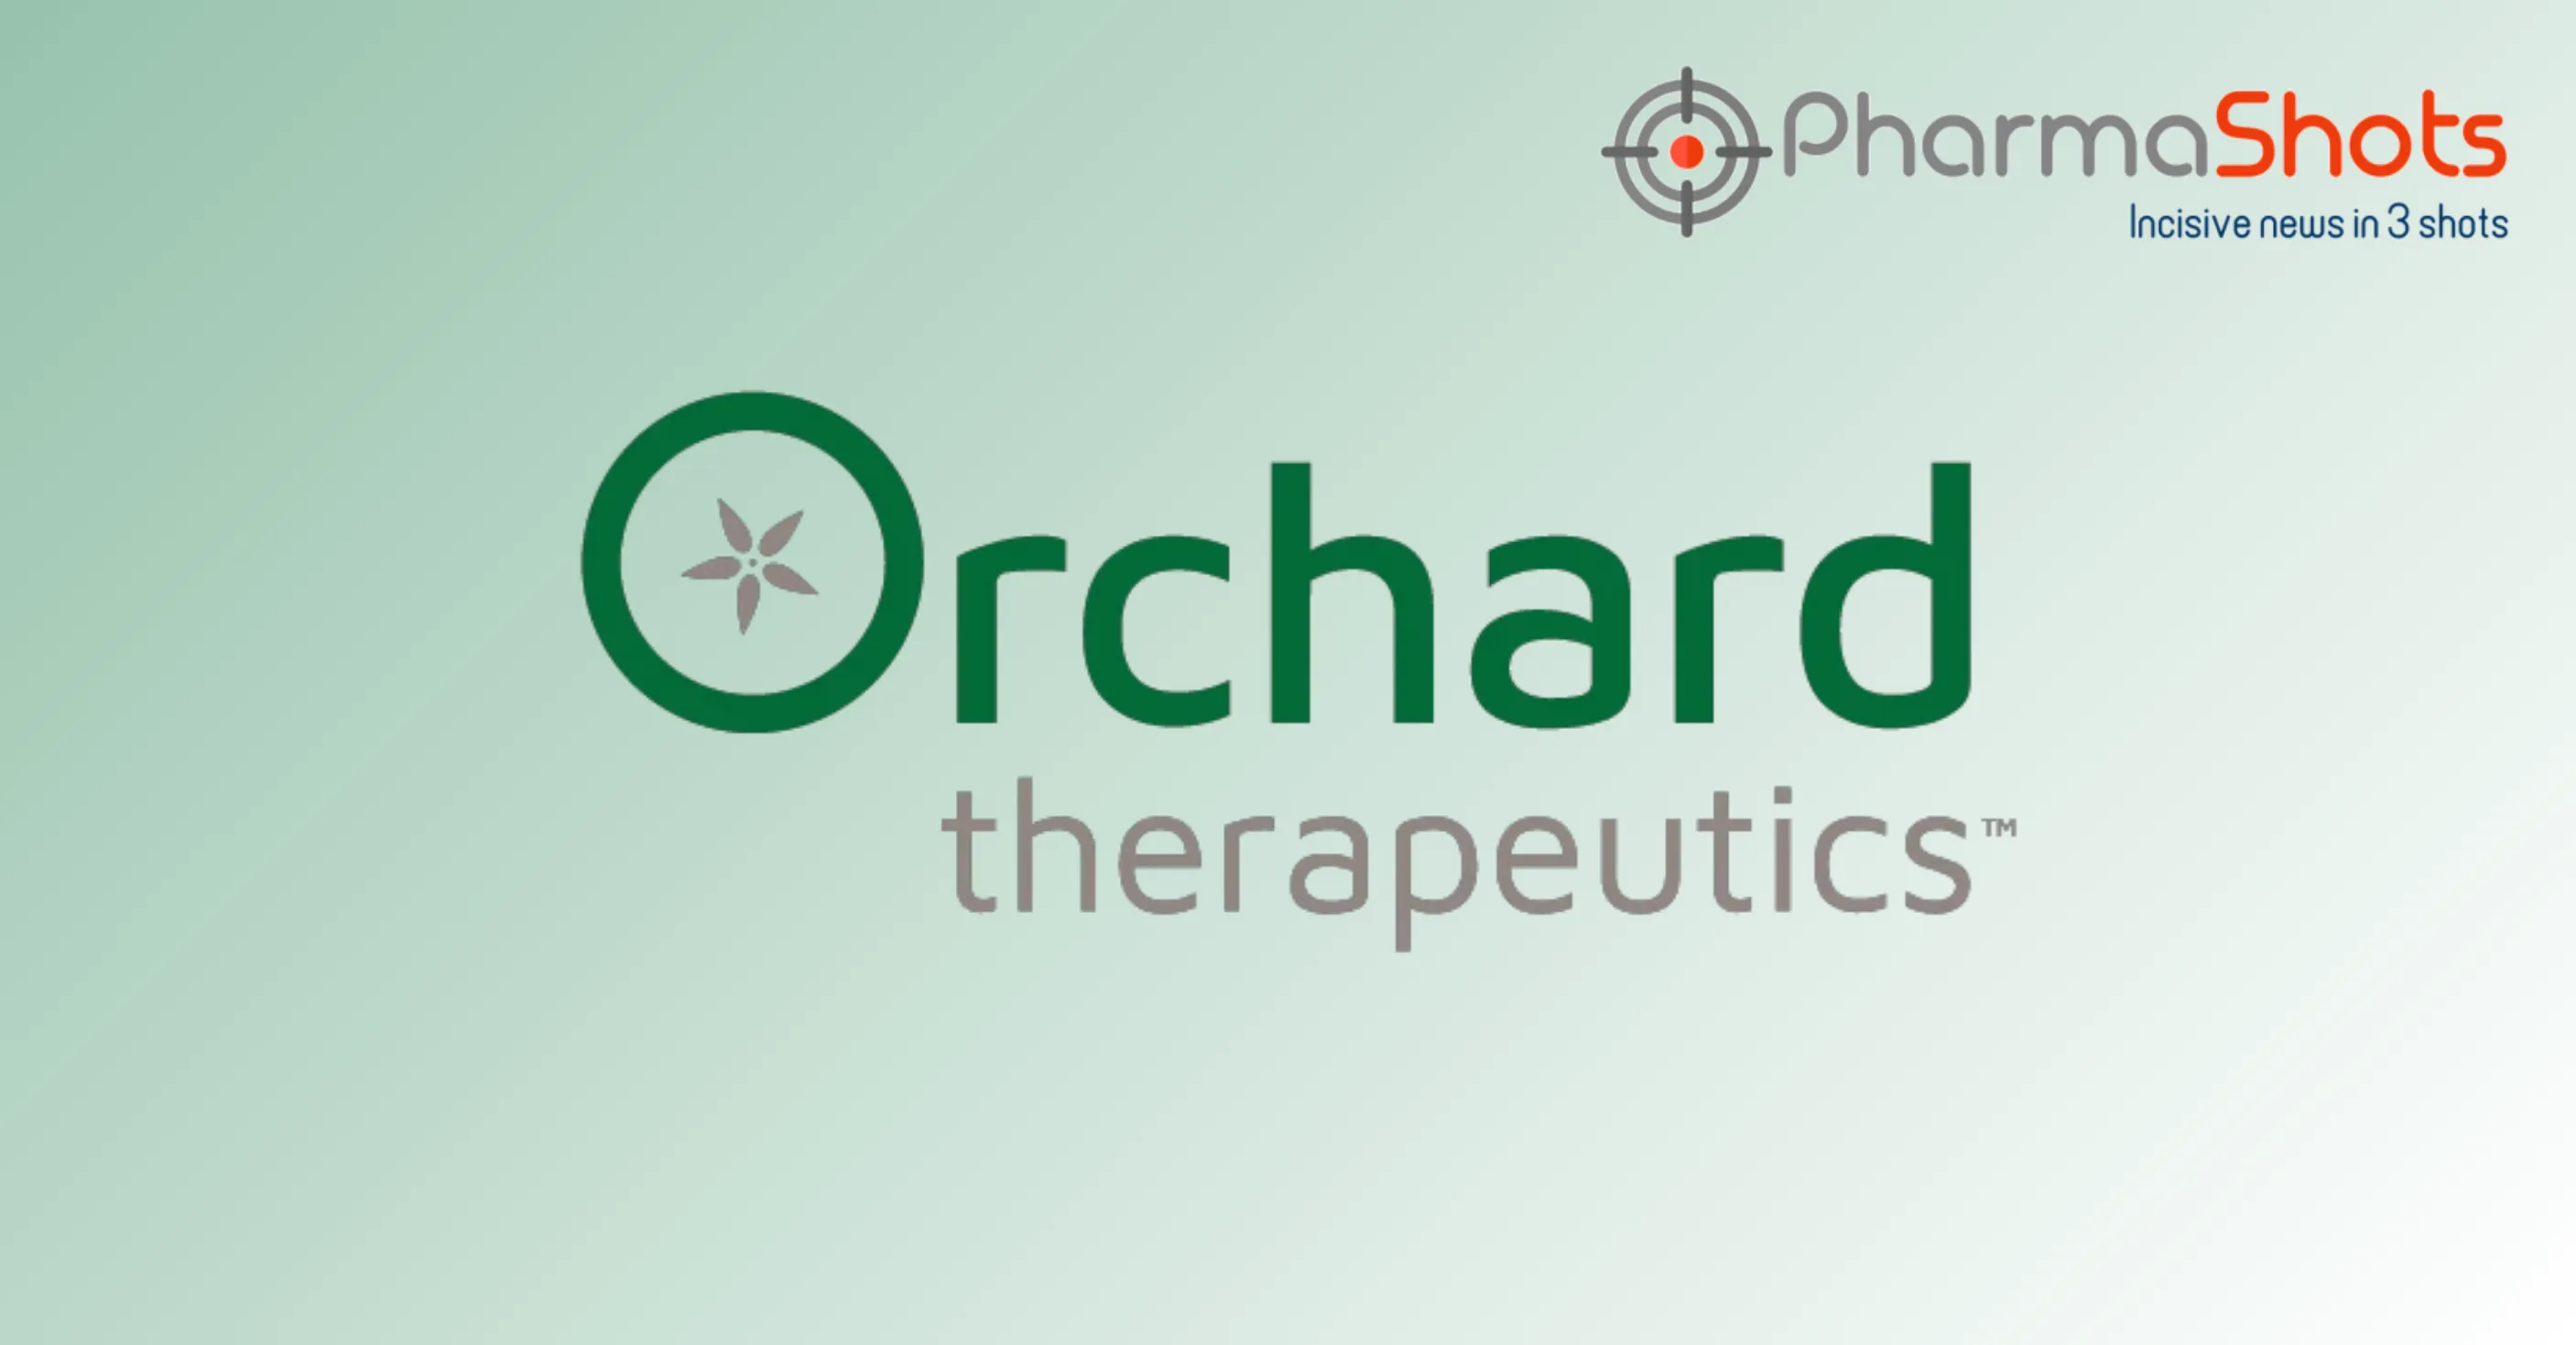 Orchard Therapeutics’ Reports the US FDA’s Approval of Lenmeldy for the Treatment of Metachromatic Leukodystrophy (MLD)